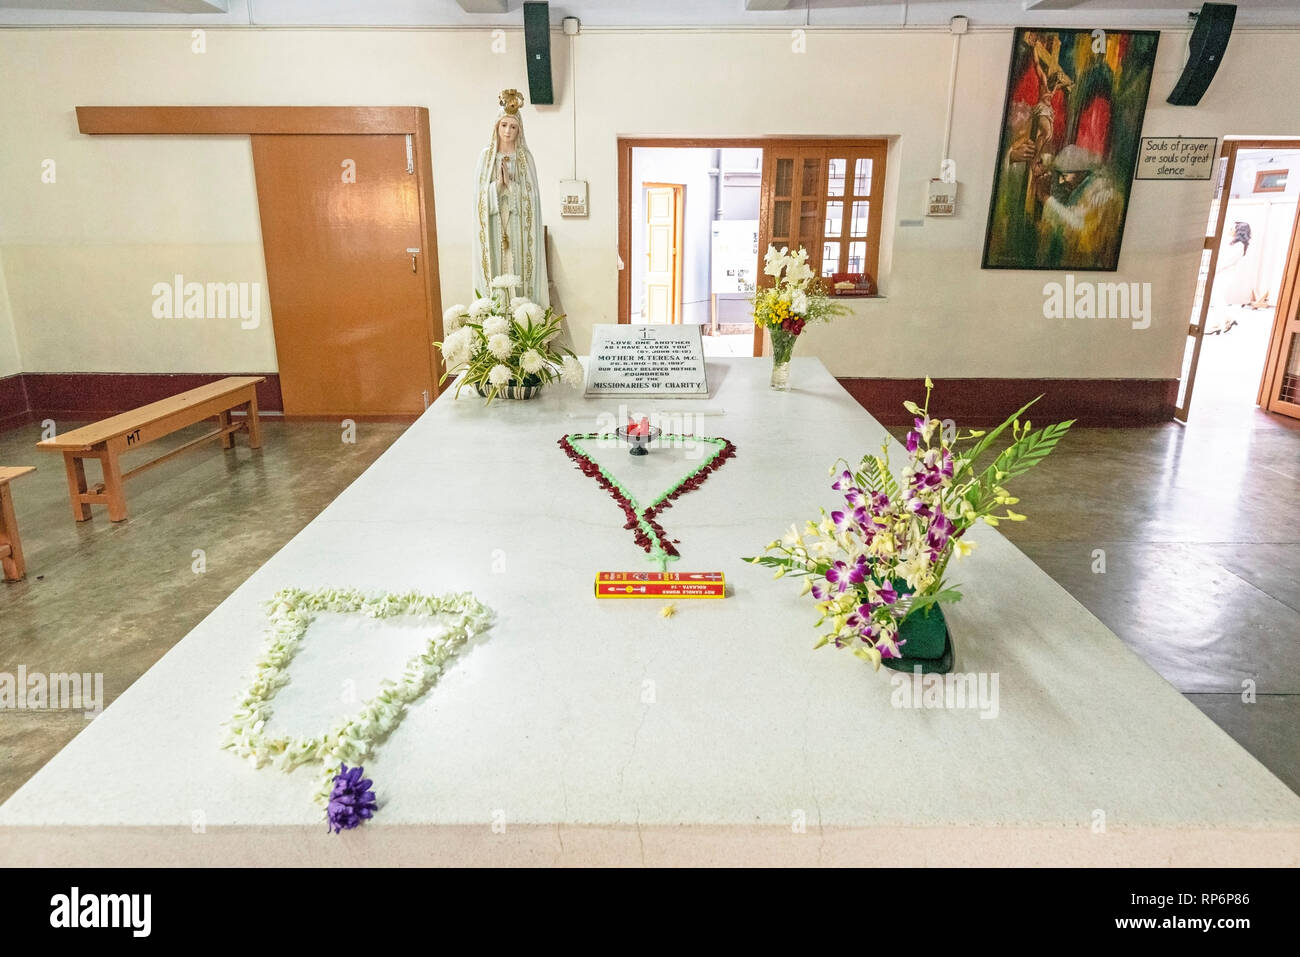 Mother Teresa's tomb, preserved room are on display at this quiet convent 'The Mother House of the Missionaries of Charity' in Kolkata. Stock Photo